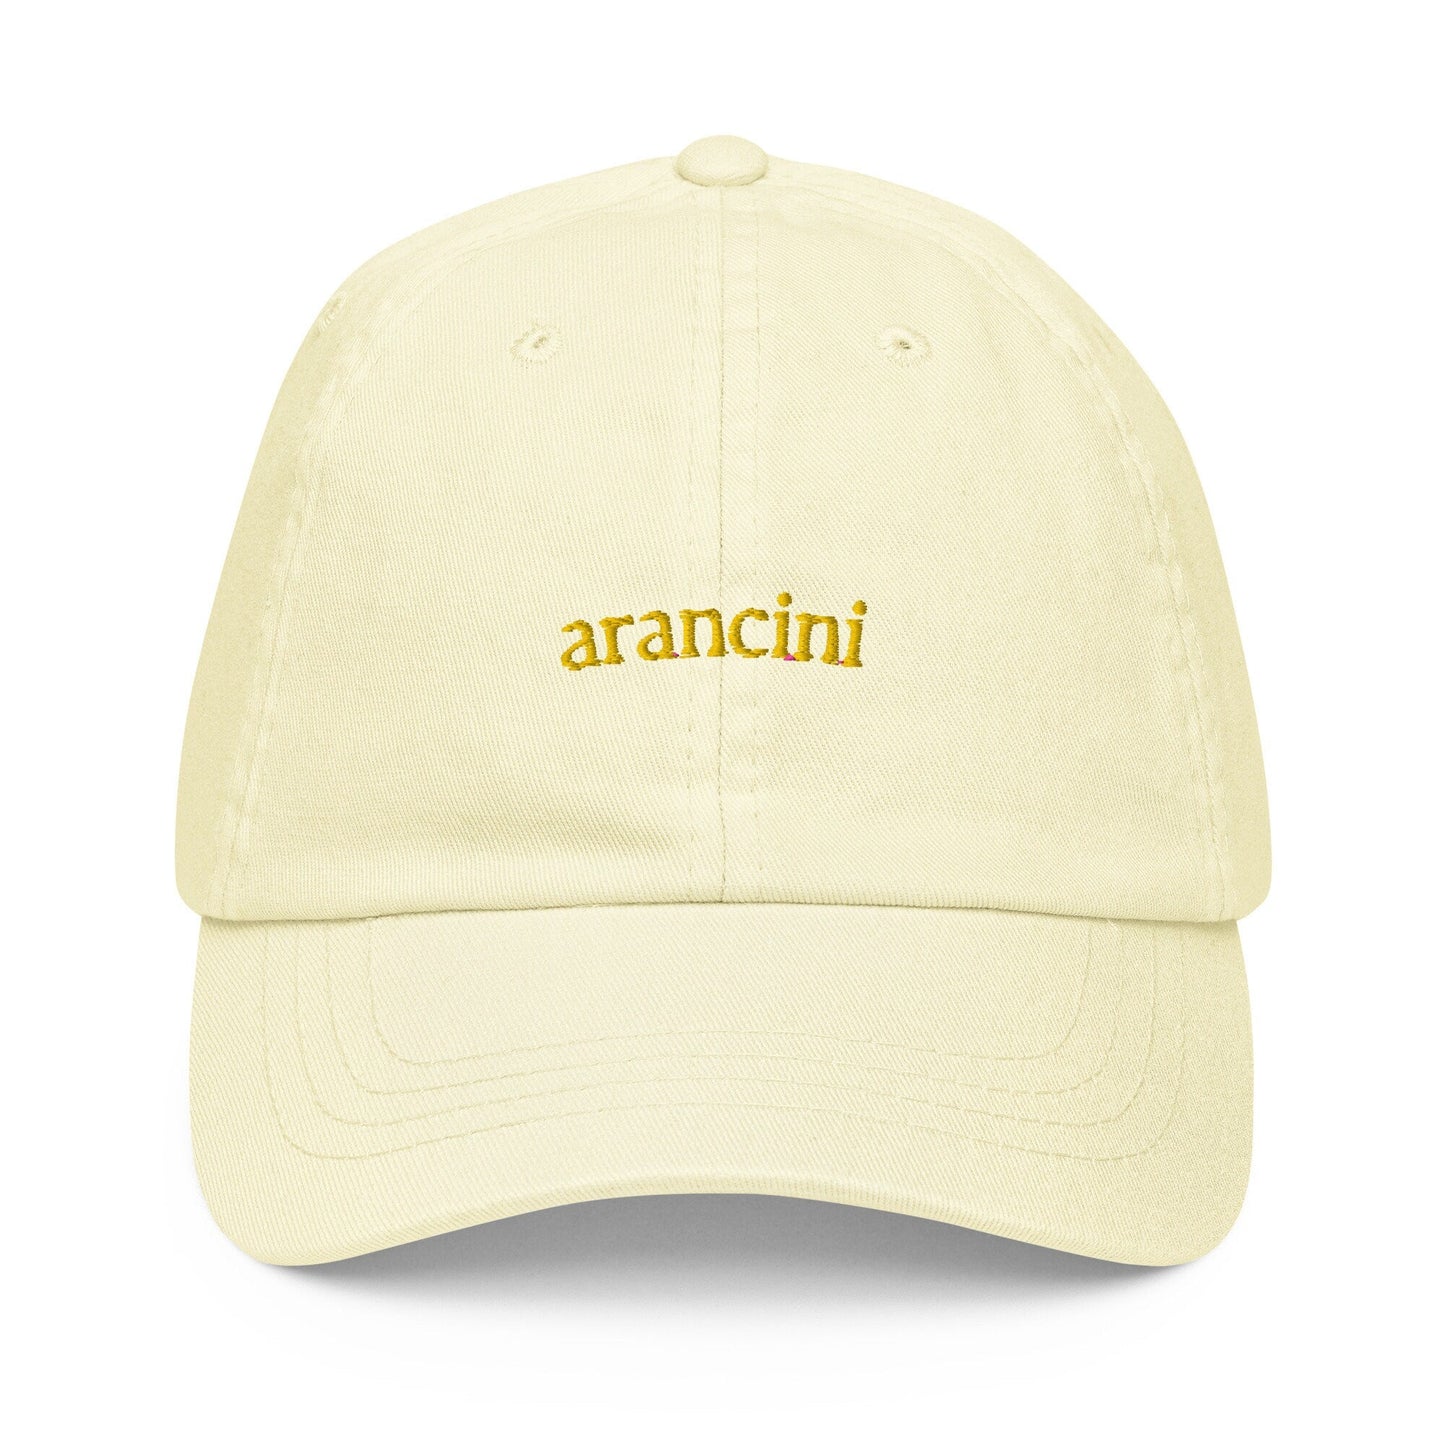 Arancini Dad Hat - Gift for Italian food lovers - Cotton embroidered Cap - Evilwater Originals